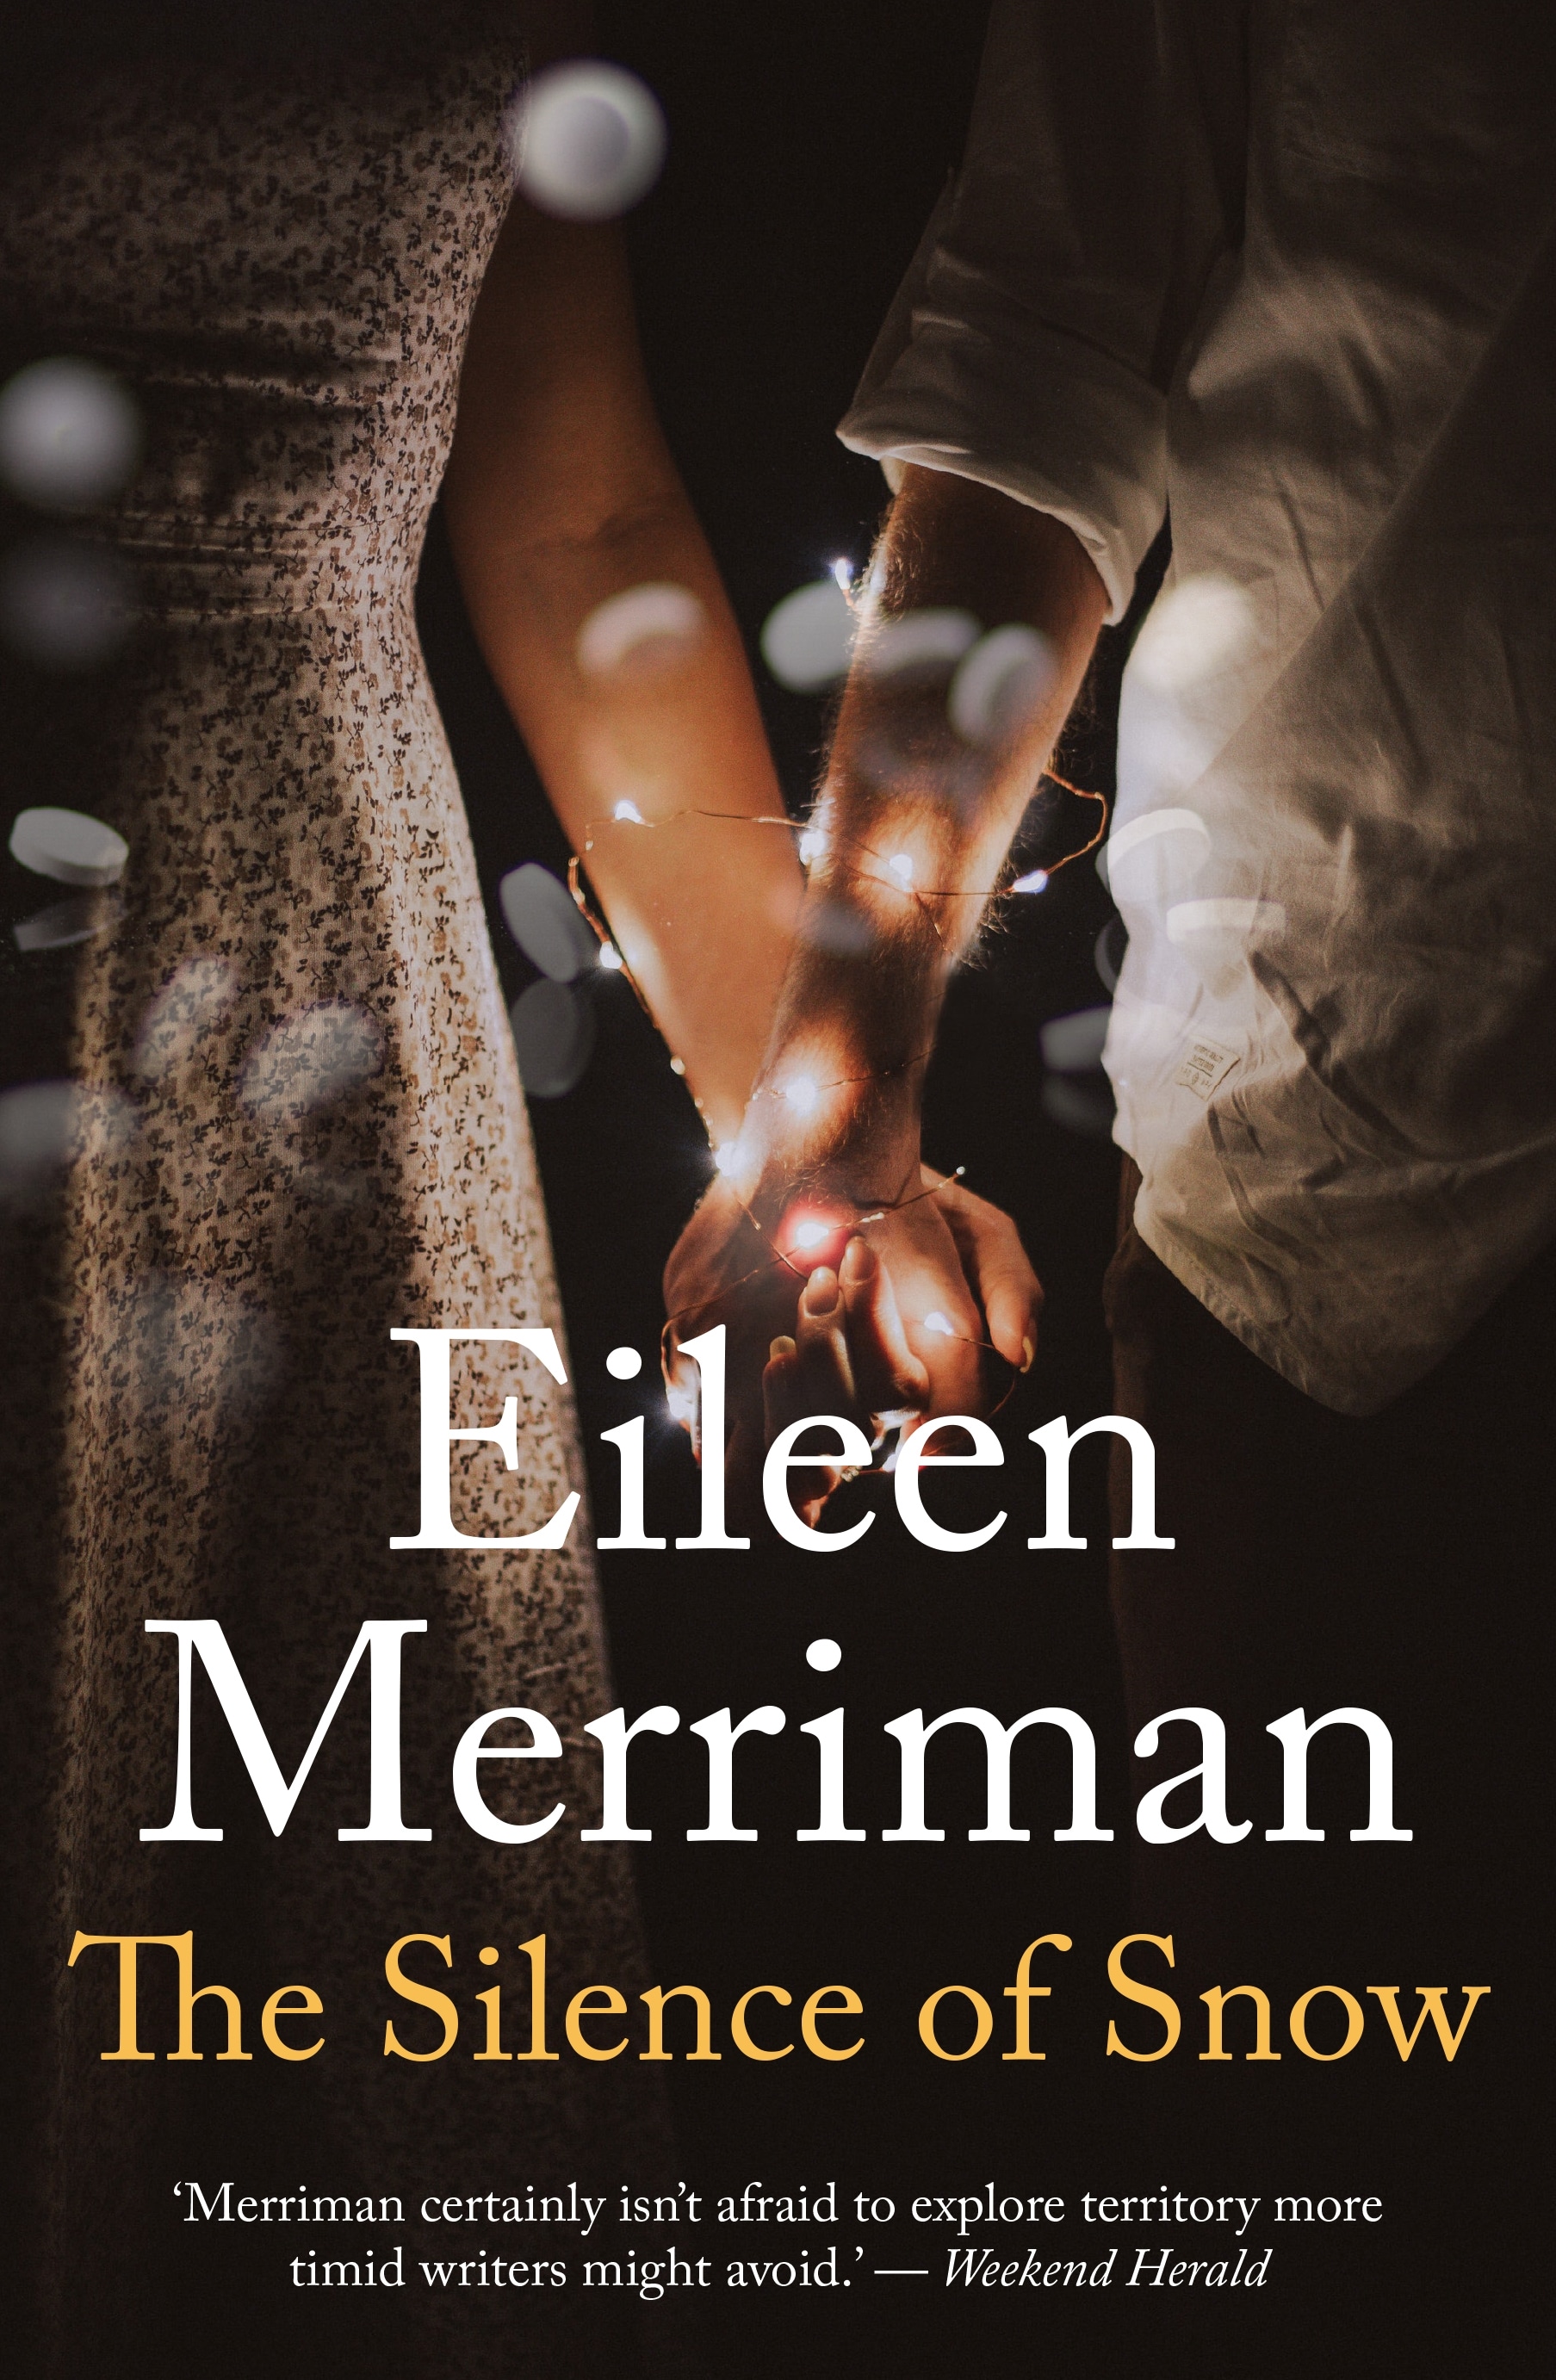 Book “The Silence of Snow” by Eileen Merriman — September 1, 2020